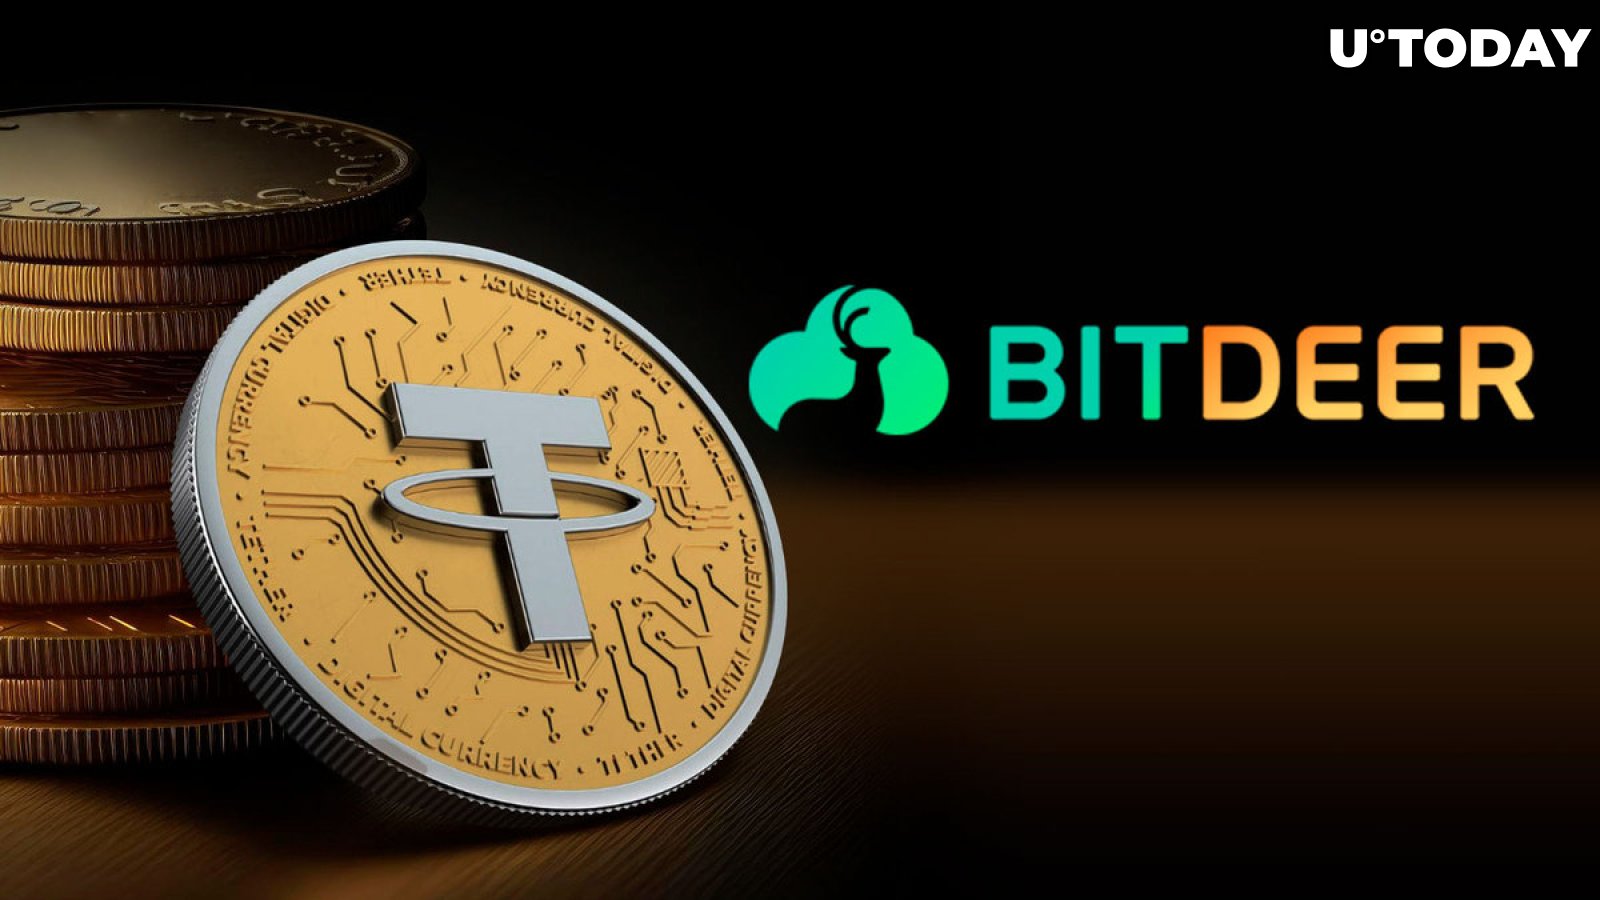 Tether Injects $150 Million in Bitcoin Hardware Maker, Bitdeer: Details